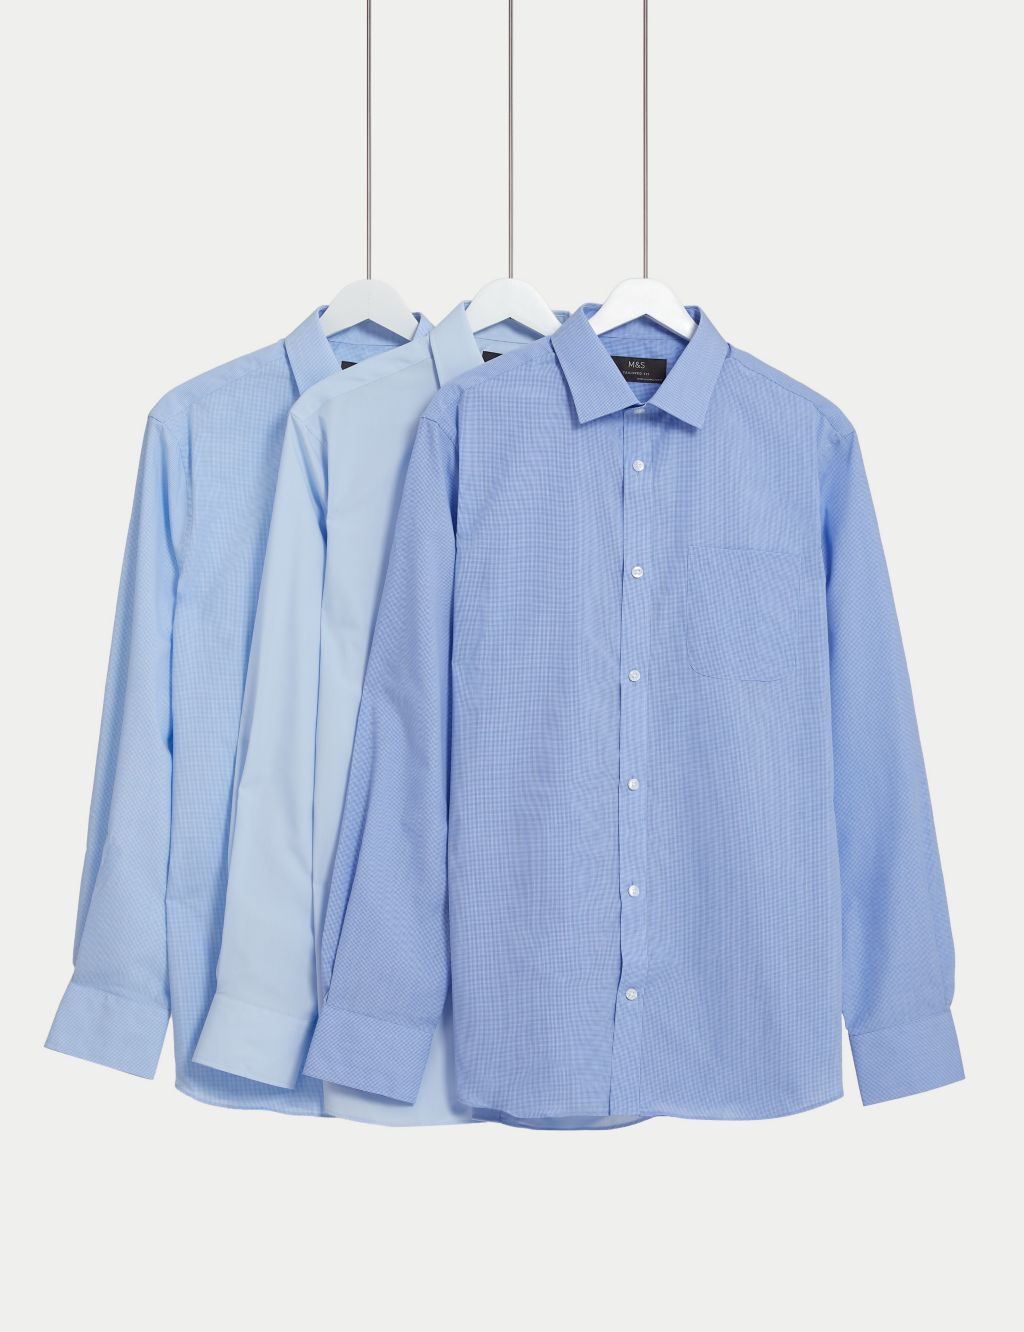 3pk Tailored Fit Long Sleeve Shirts image 1